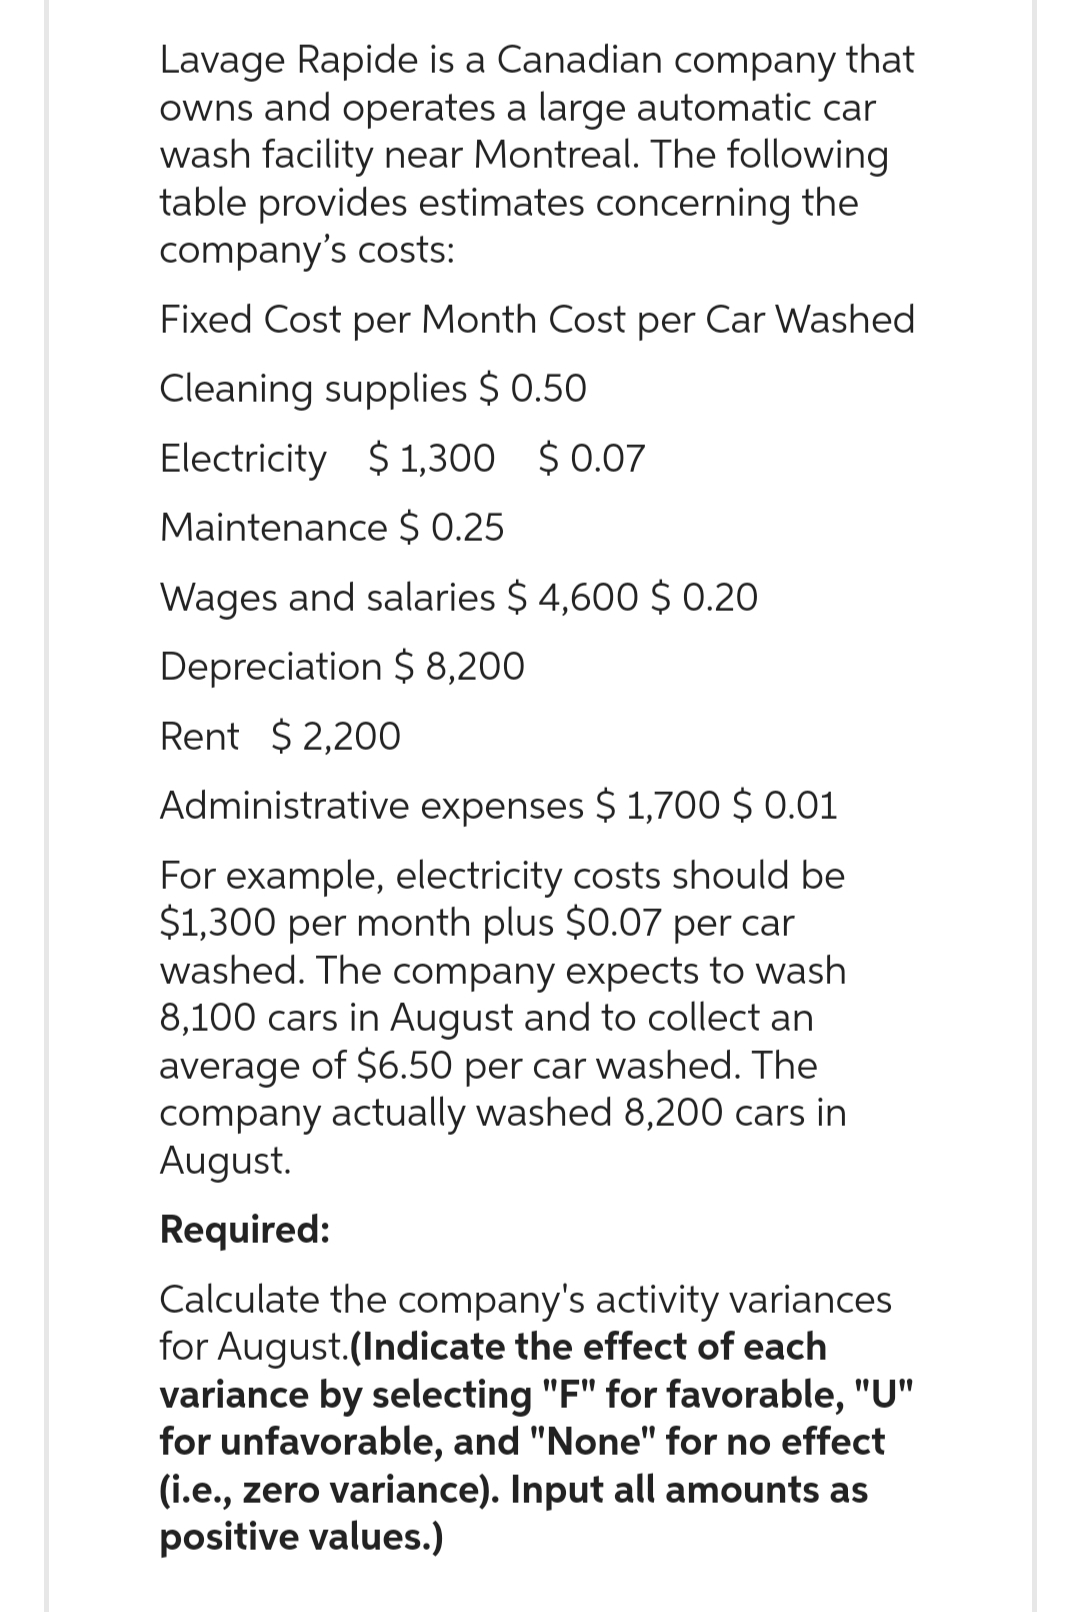 Lavage Rapide is a Canadian company that
owns and operates a large automatic car
wash facility near Montreal. The following
table provides estimates concerning the
company's costs:
Fixed Cost per Month Cost per Car Washed
Cleaning supplies $ 0.50
Electricity $1,300 $0.07
Maintenance $ 0.25
Wages and salaries $4,600 $ 0.20
Depreciation $ 8,200
Rent $2,200
Administrative expenses $ 1,700 $ 0.01
For example, electricity costs should be
$1,300 per month plus $0.07 per car
washed. The company expects to wash
8,100 cars in August and to collect an
average of $6.50 per car washed. The
company actually washed 8,200 cars in
August.
Required:
Calculate the company's activity variances
for August.(Indicate the effect of each
variance by selecting "F" for favorable, "U"
for unfavorable, and "None" for no effect
(i.e., zero variance). Input all amounts as
positive values.)